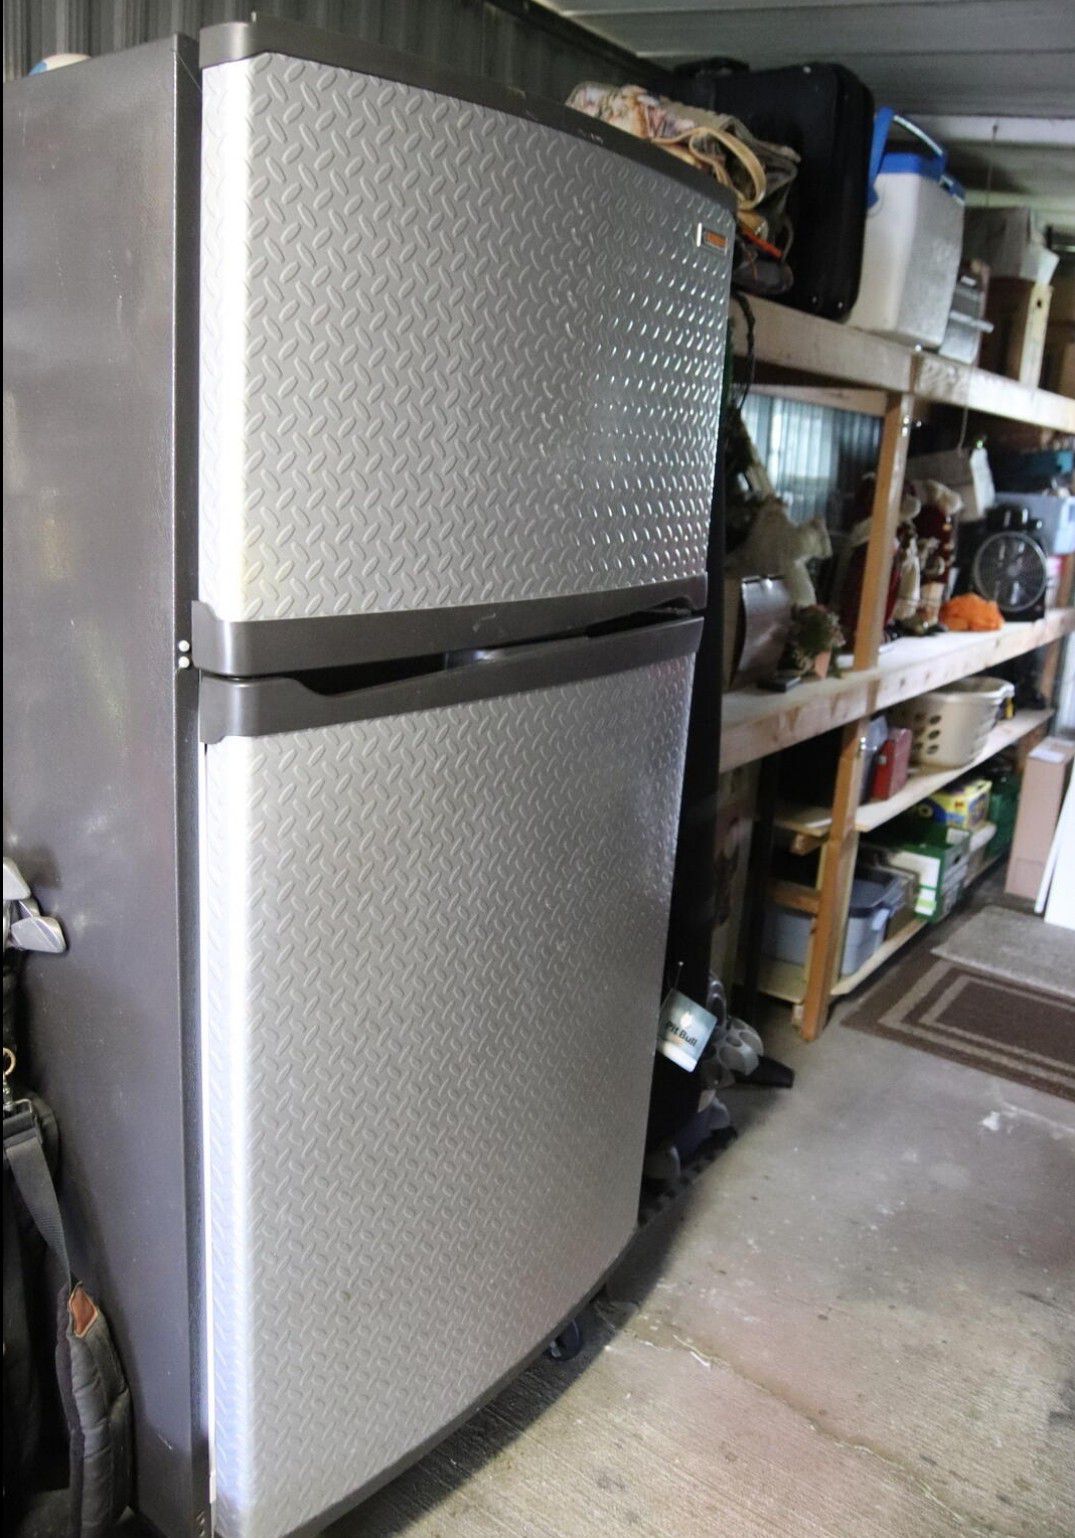 Whirlpool Gladiator Upright Freezer with small section that can be Refrigerator